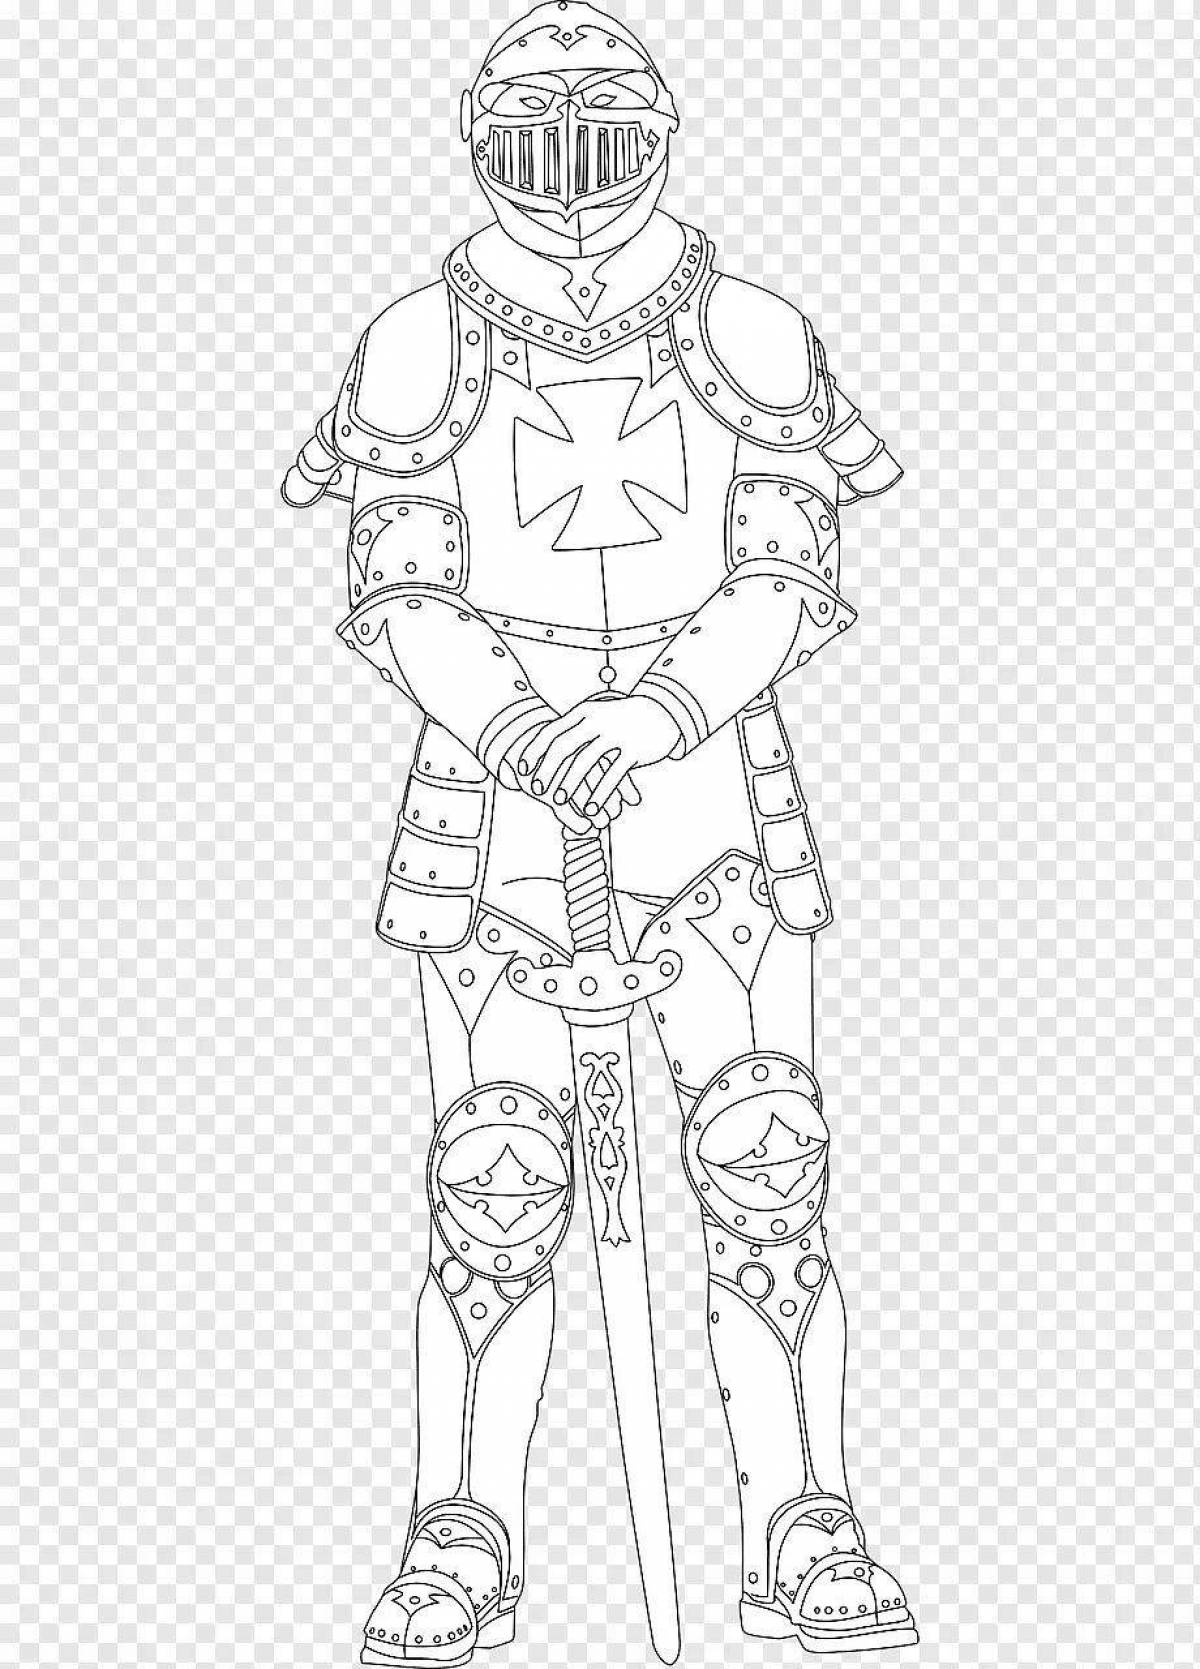 Fearless armor knight coloring book